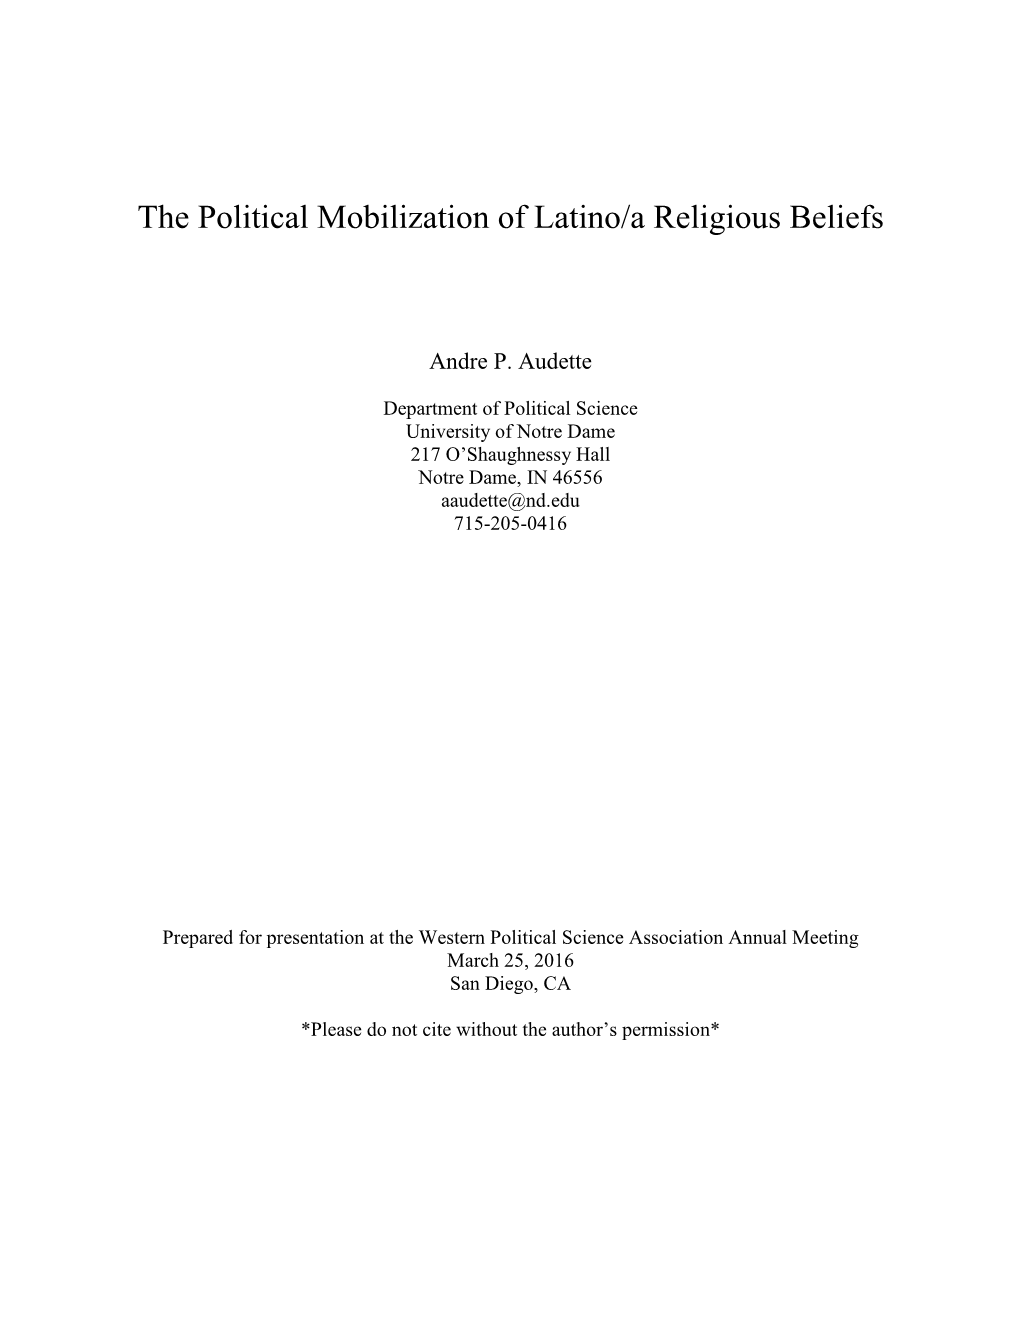 The Political Mobilization of Latino/A Religious Beliefs